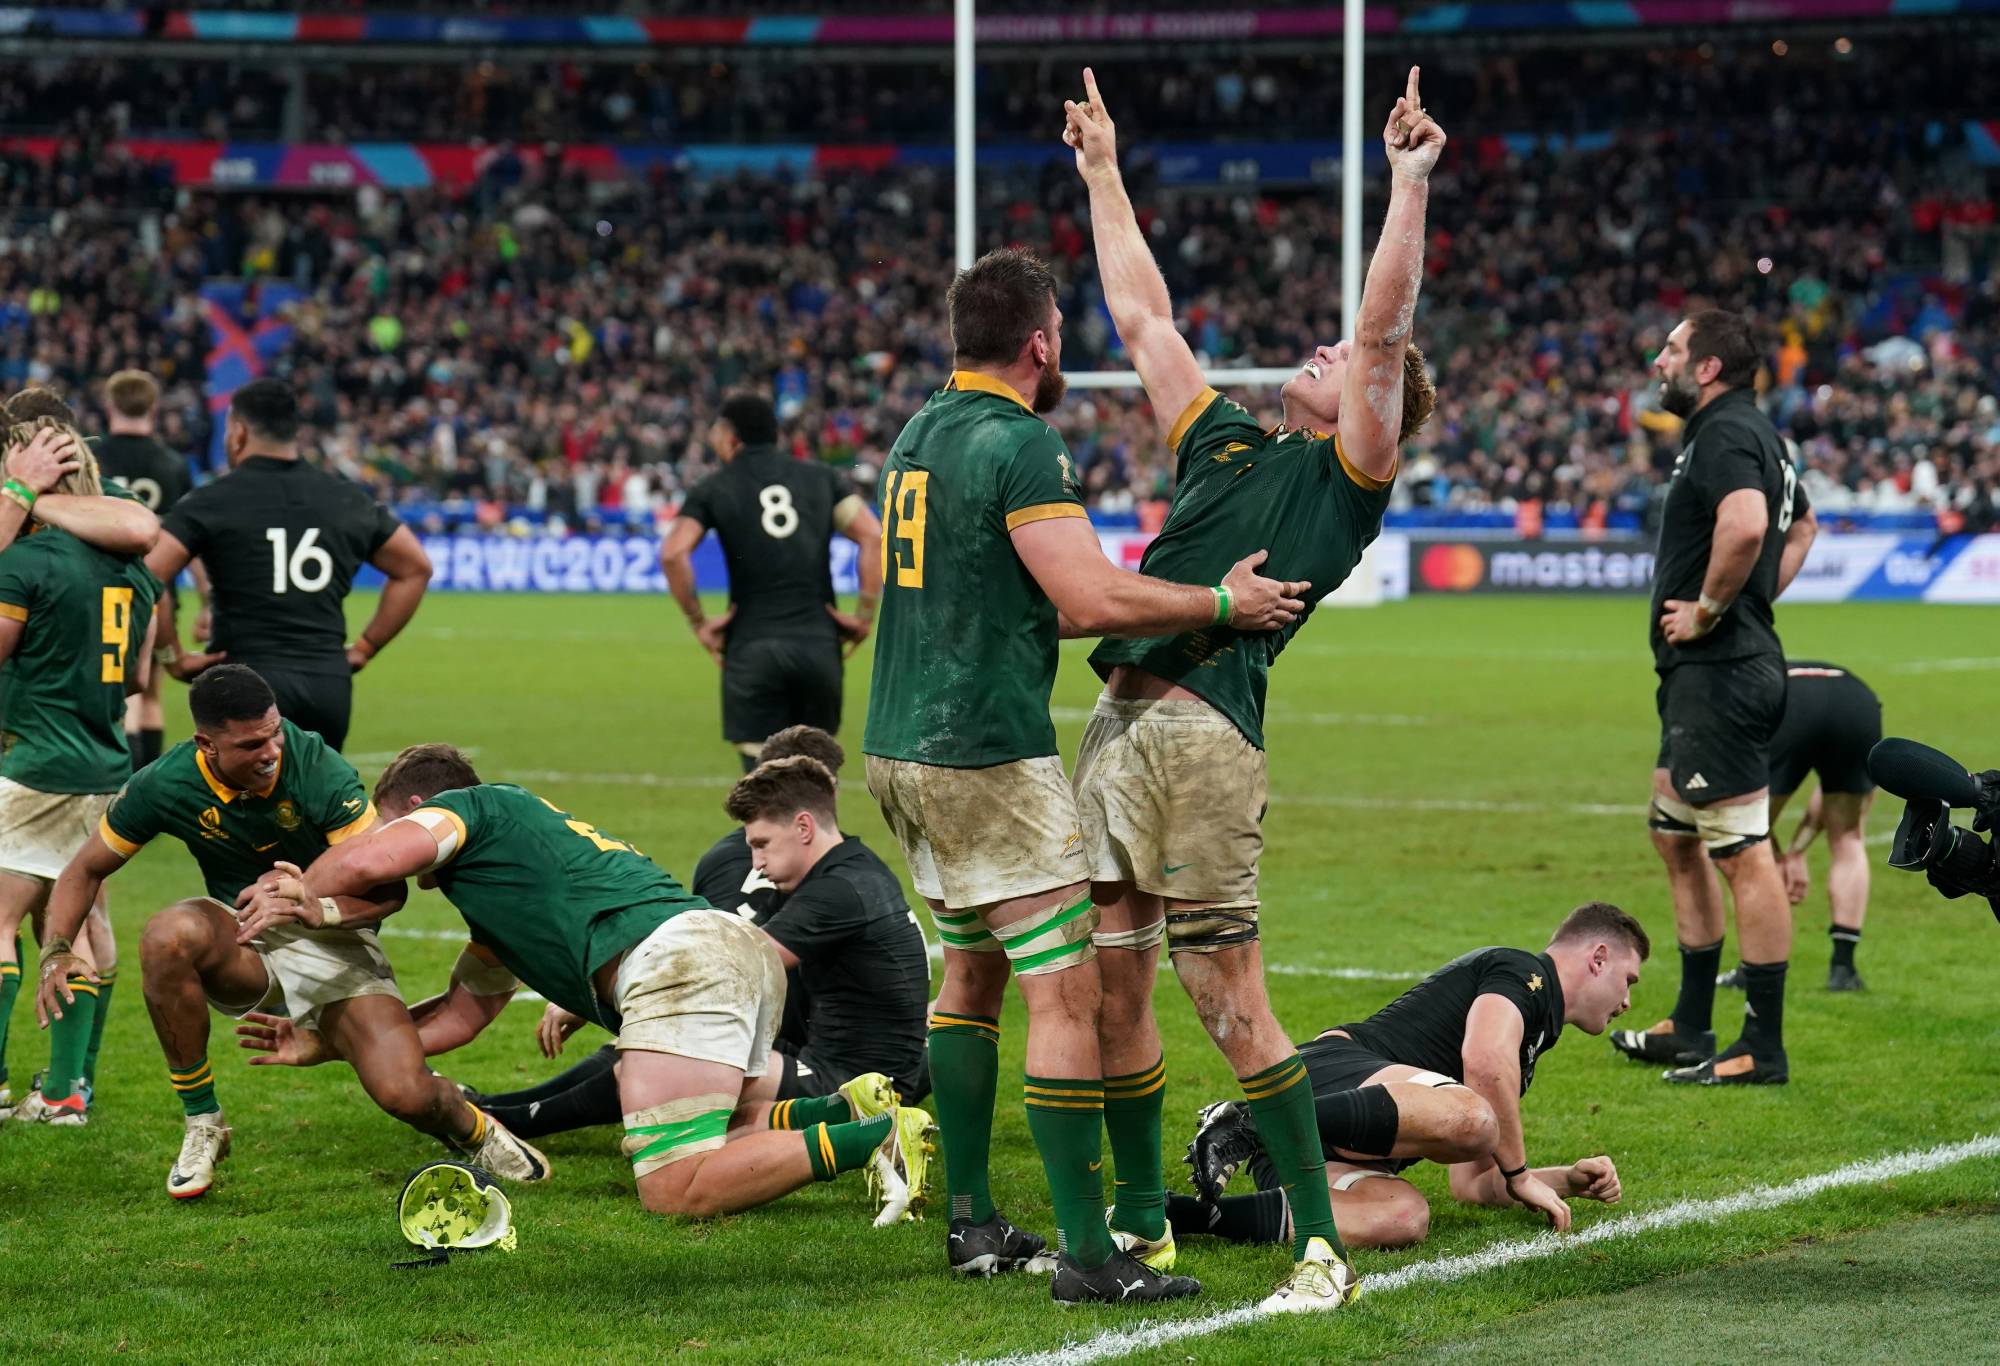 South Africa's Jean Kleyn (left) and Pieter-Steph Du Toit celebrate victory after the final whistle following the Rugby World Cup 2023 final match at the Stade de France in Paris, France. Picture date: Saturday October 28, 2023. (Photo by David Davies/PA Images via Getty Images)